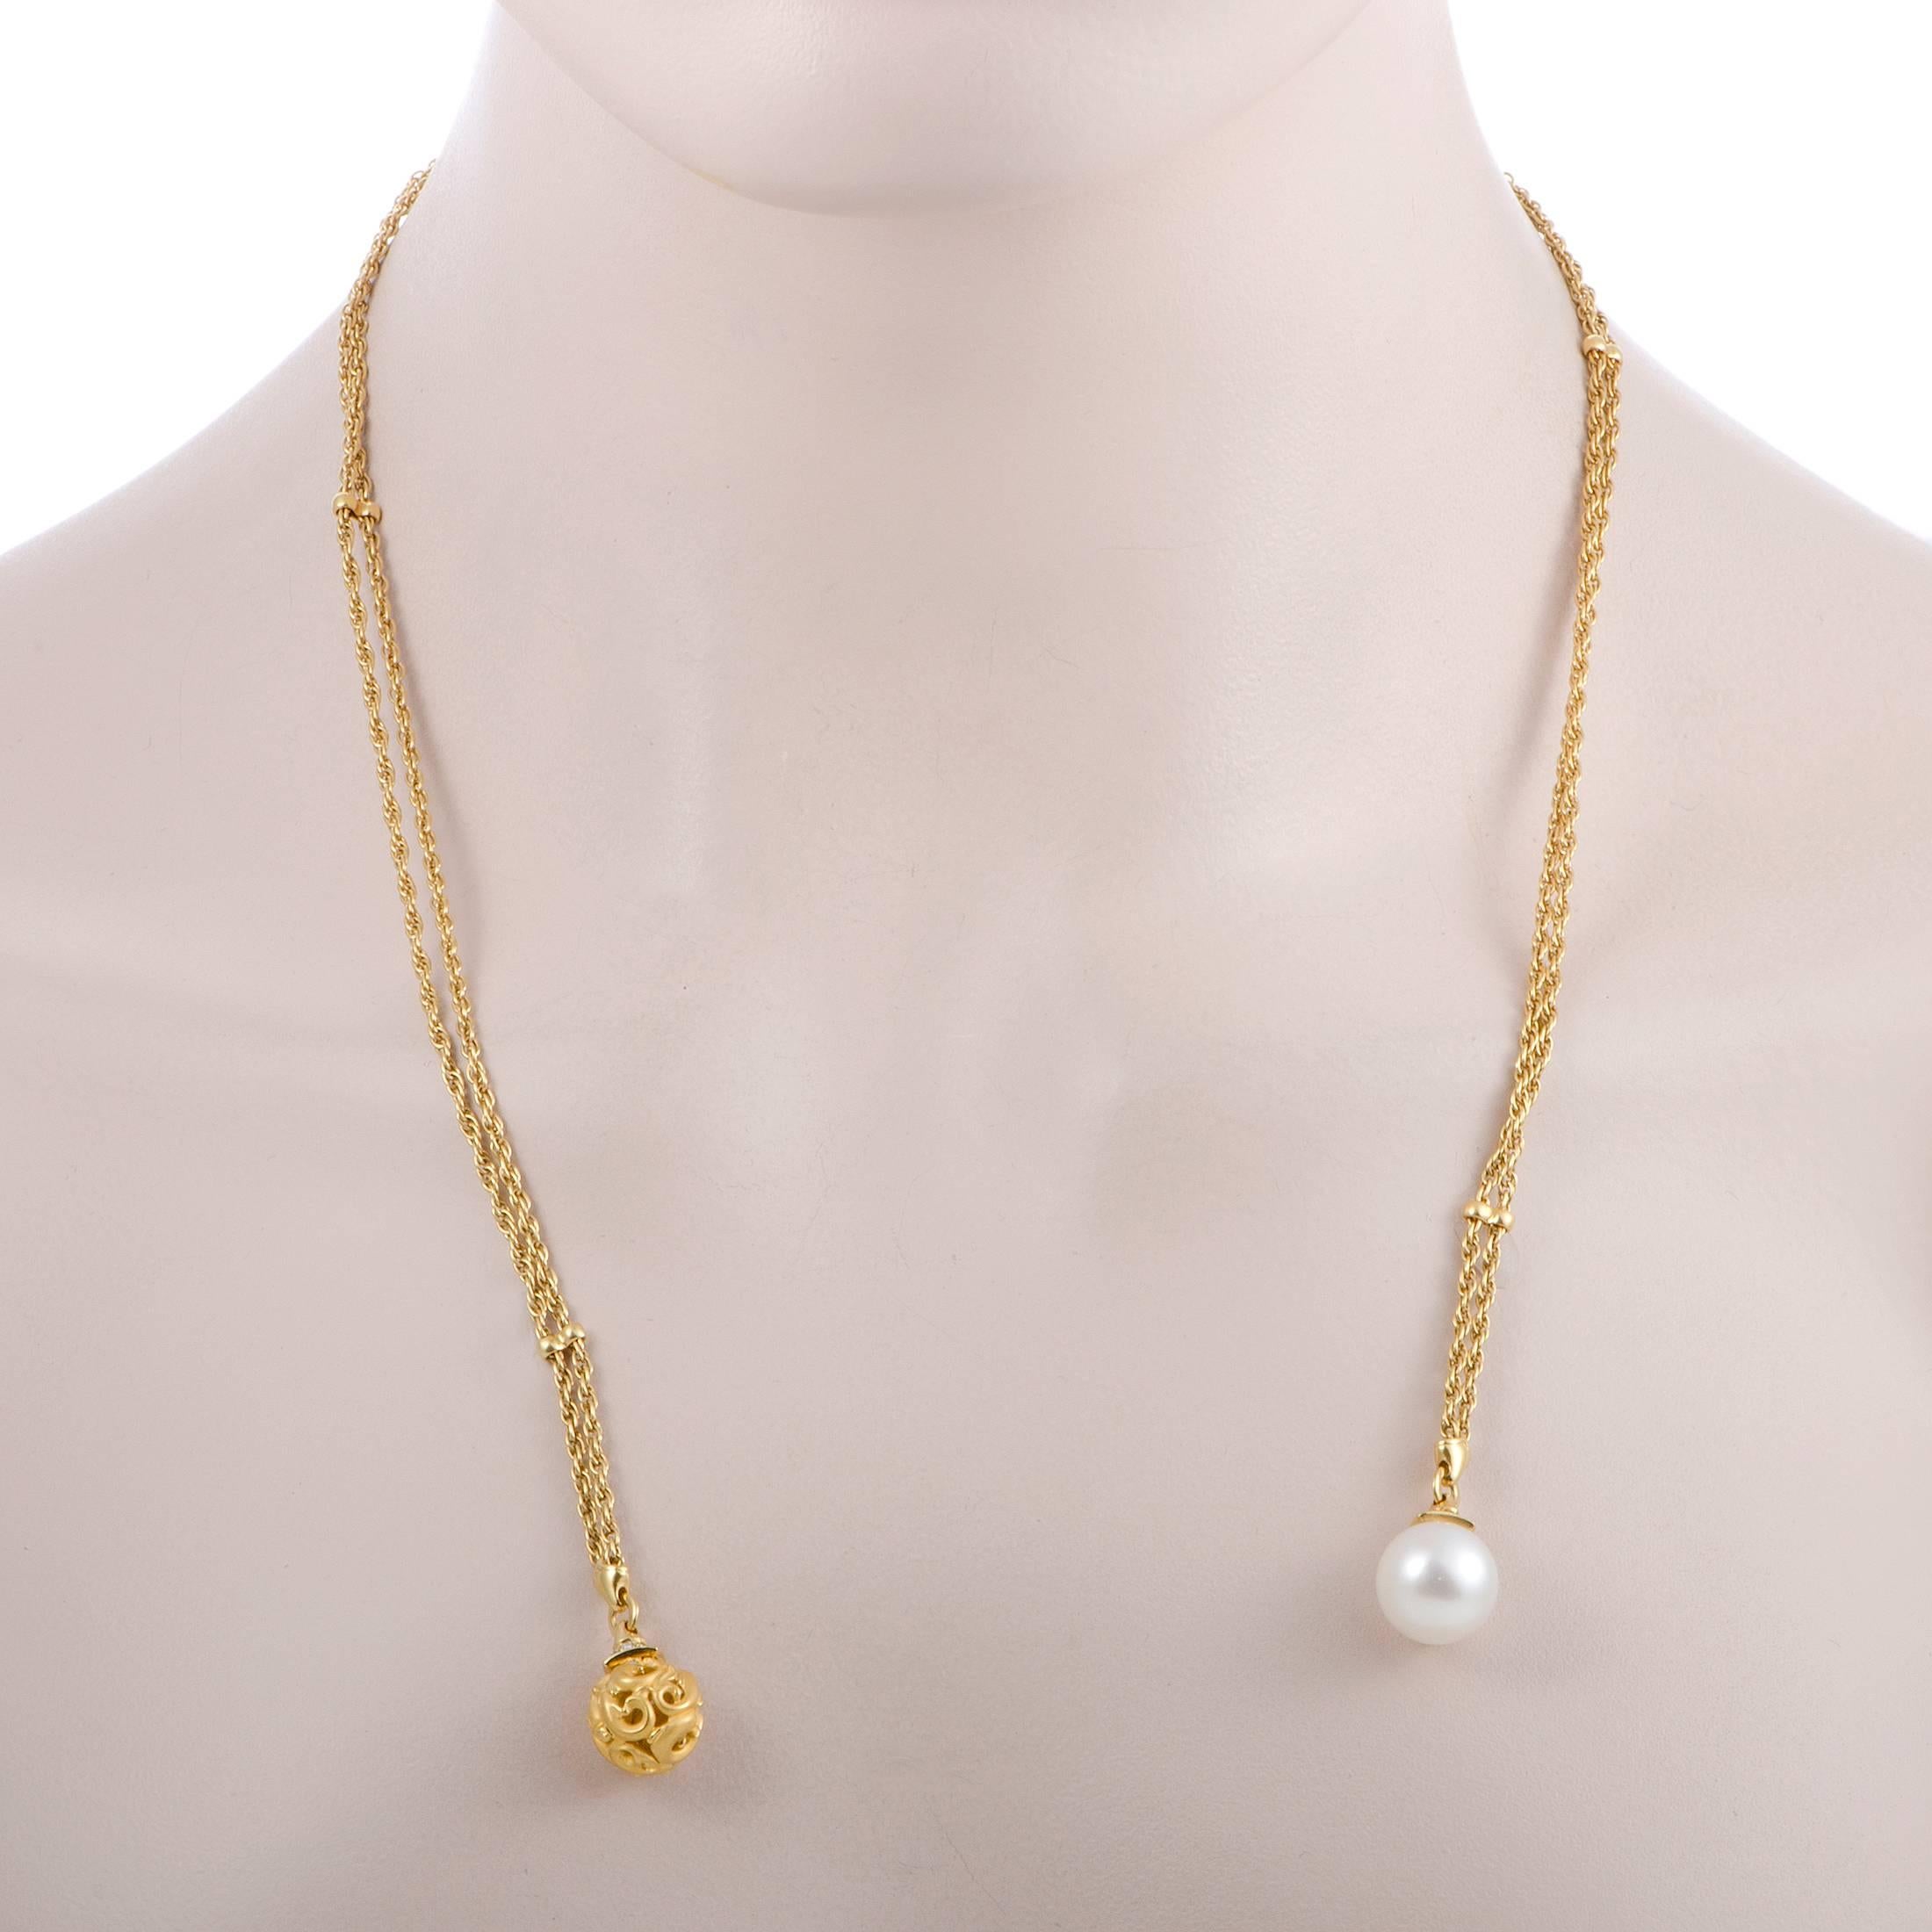 The prestigious materials and the enchanting offbeat design give this splendid necklace an incredibly graceful, elegant appeal. Presented by Carrera y Carrera, the necklace is made of exquisite 18K yellow gold and boasts two gorgeous pendants, one